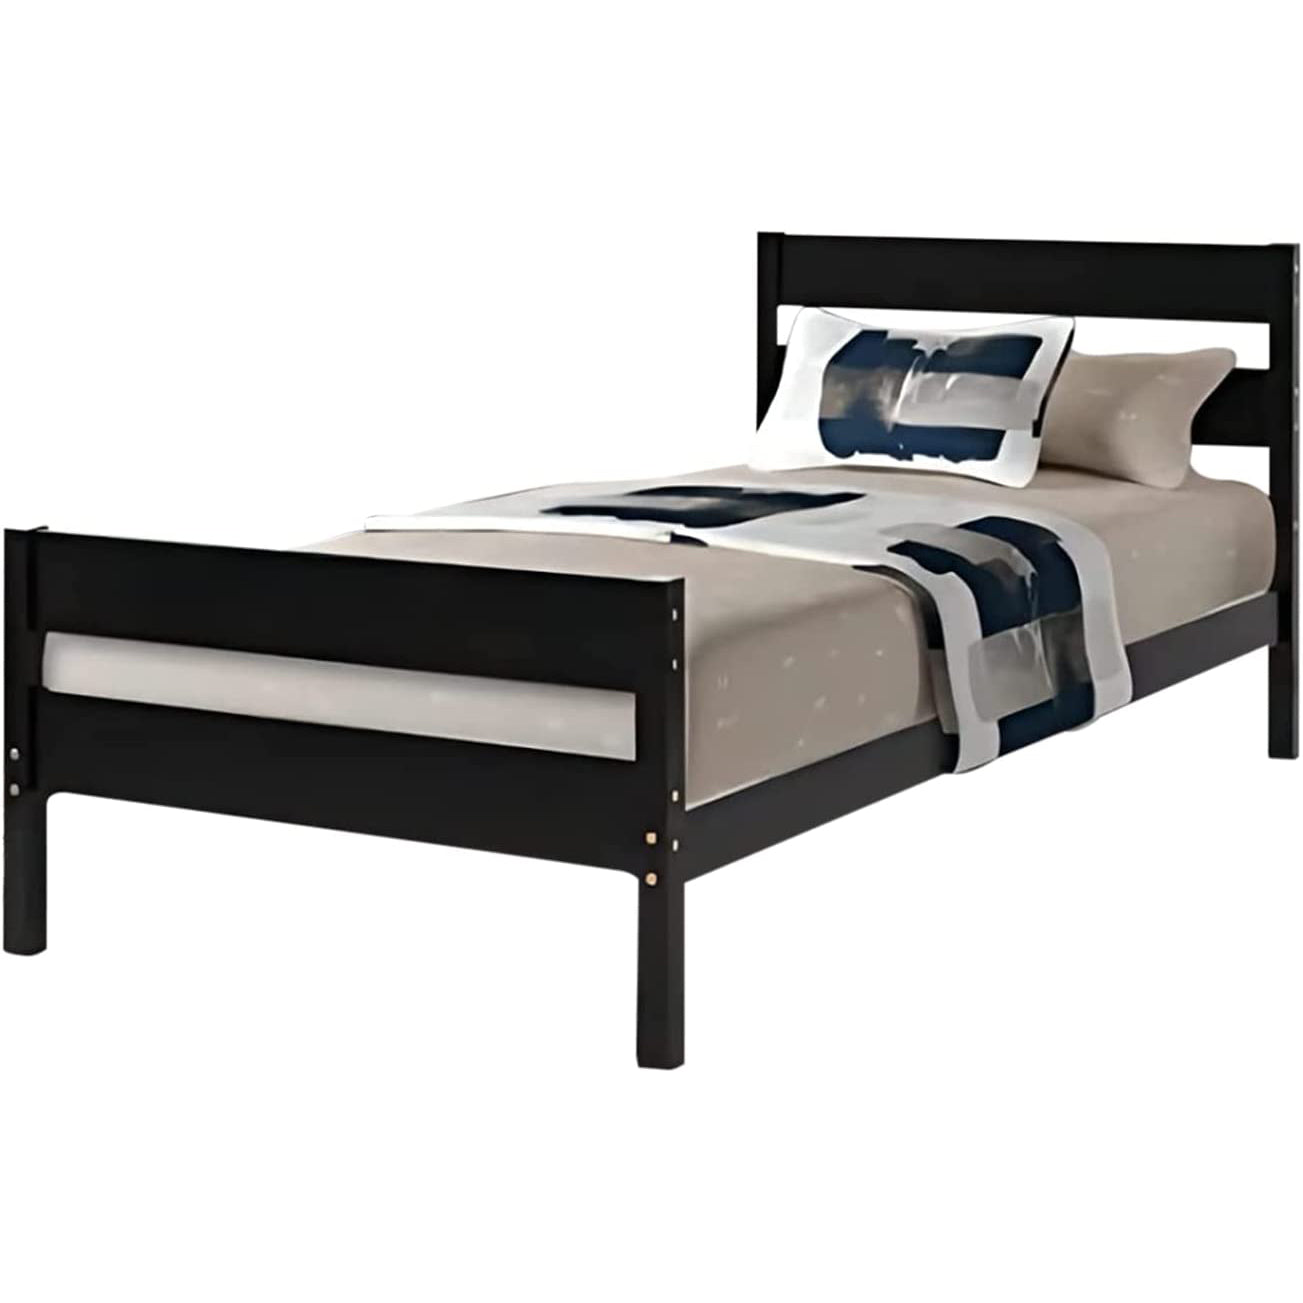 Maycasa Twin Bed, Wood Twin Bed Frame with Headboard and Footboard